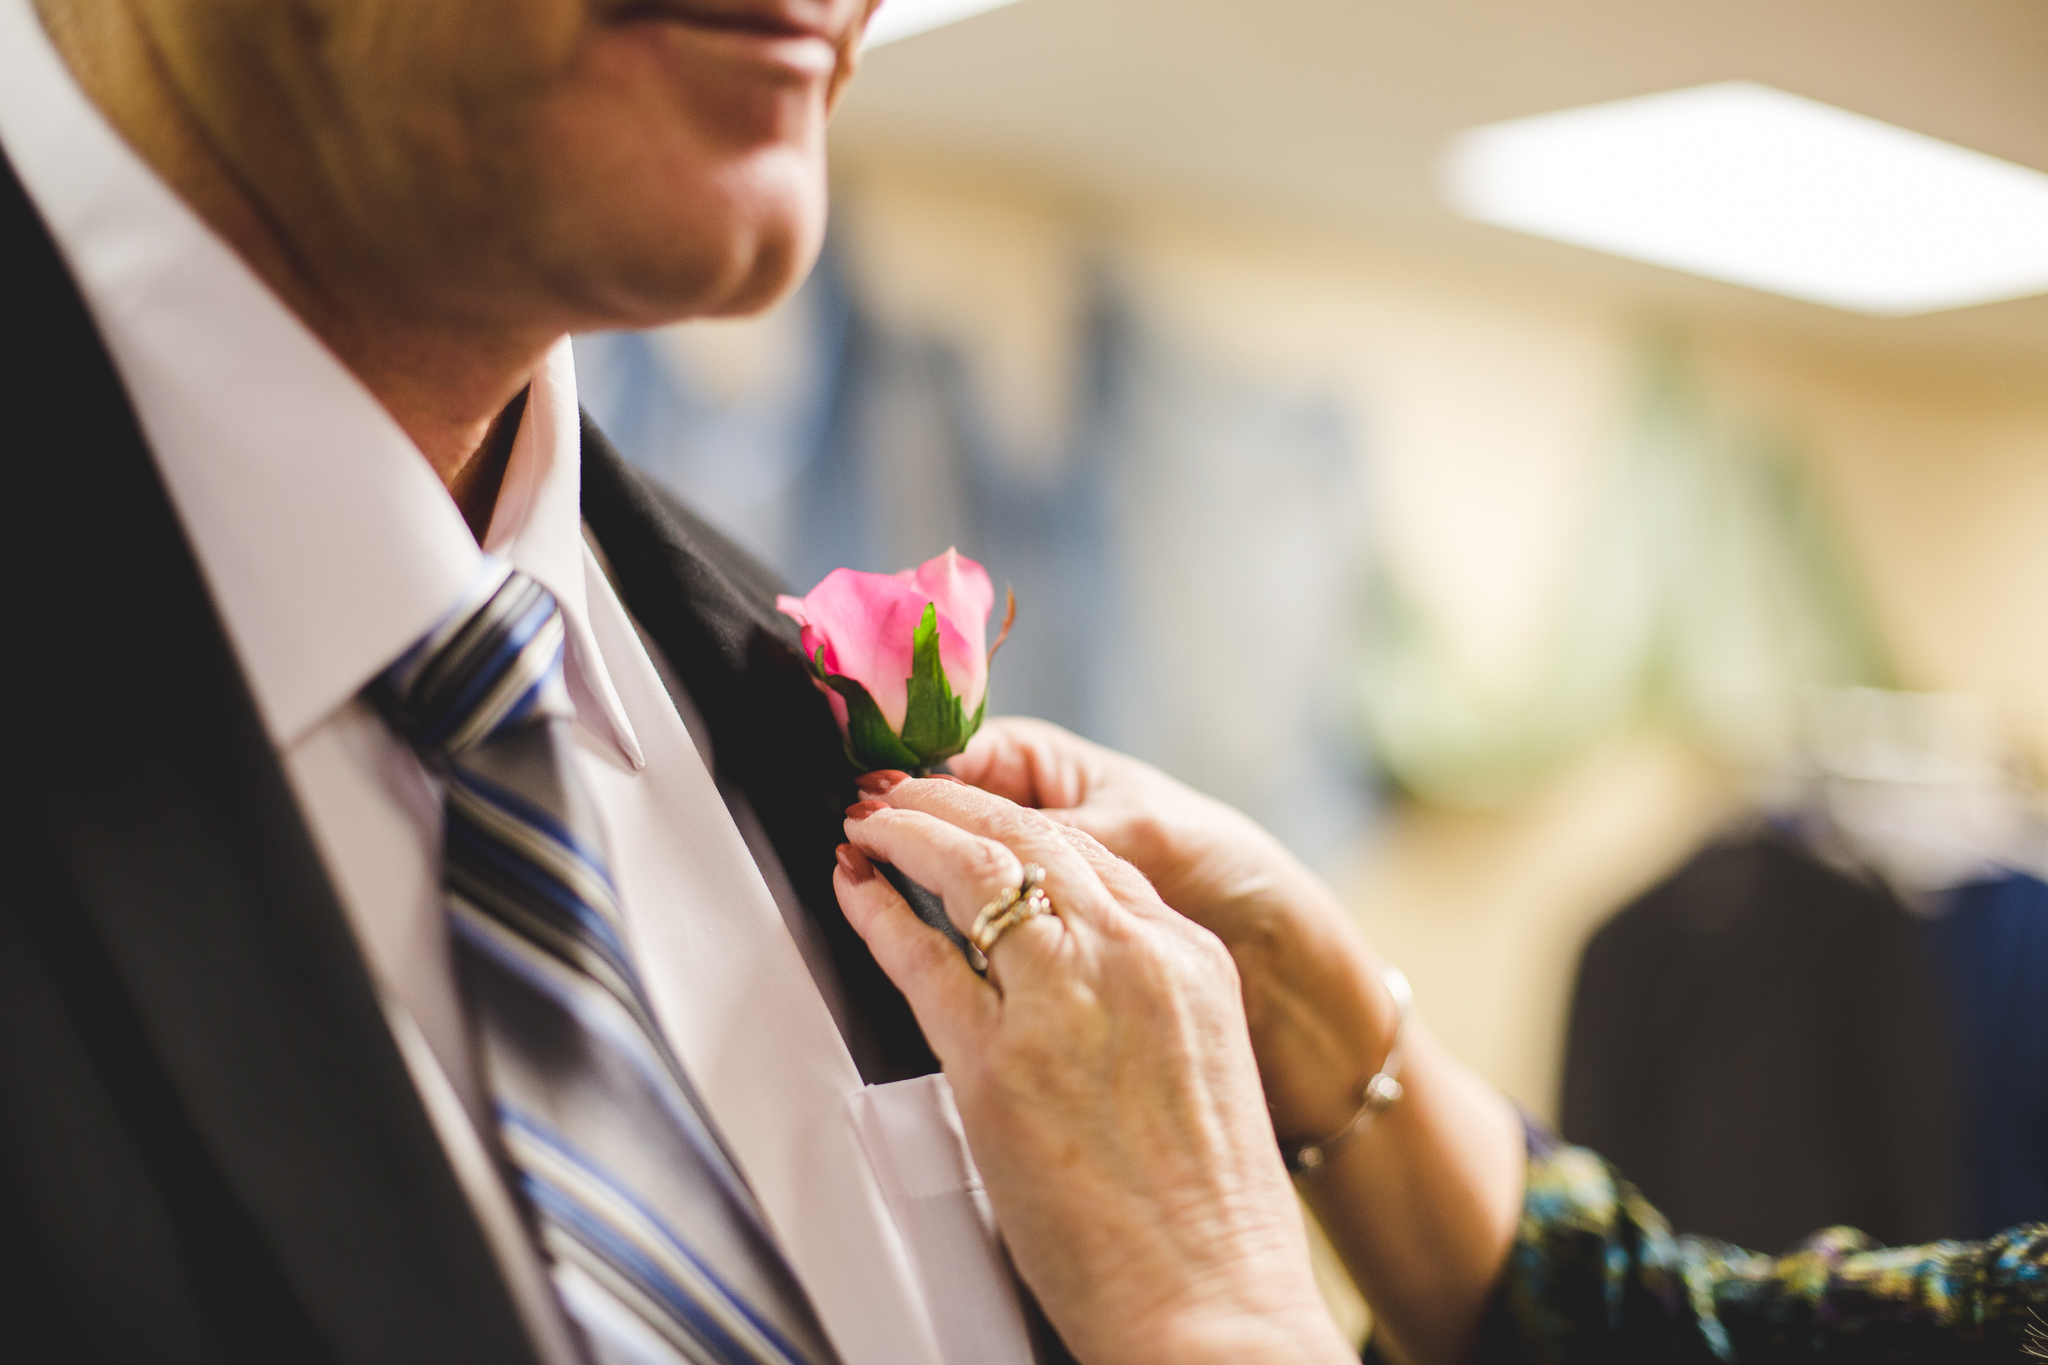 rs father of the bride gets boutonnière on